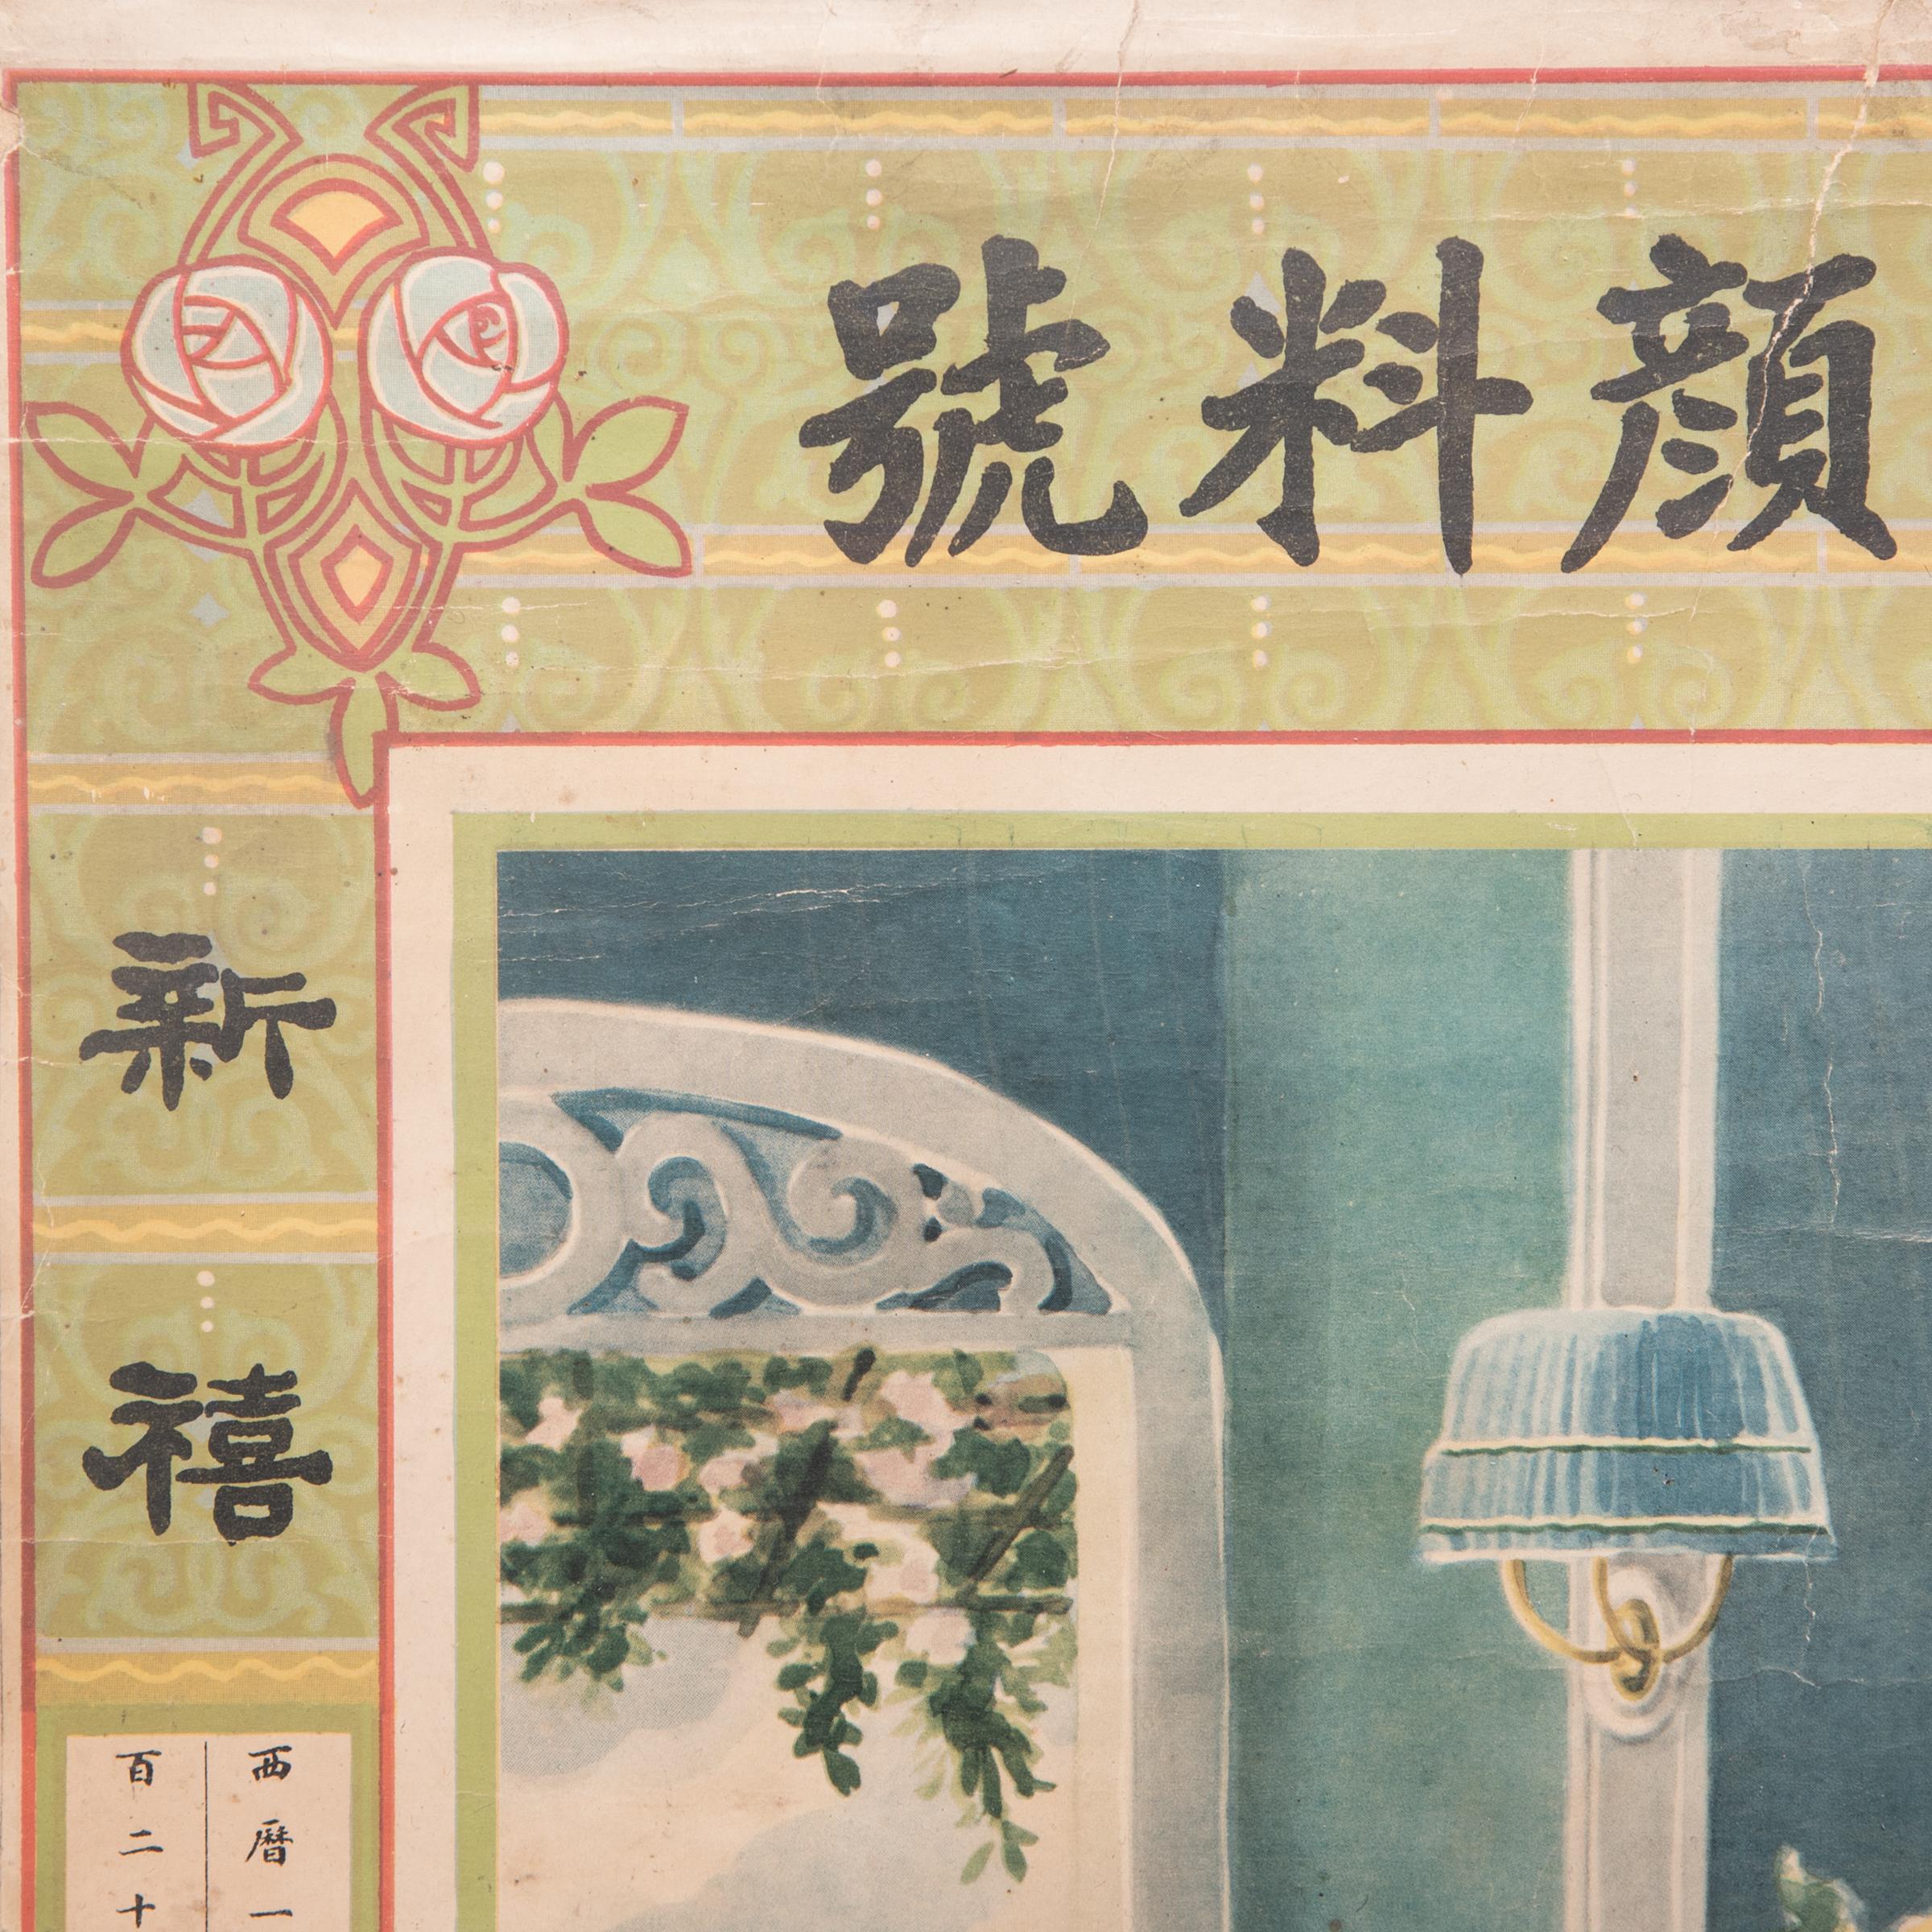 This vintage poster printed in 1932 melds the meticulous detail of traditional Chinese painting with the craft of color lithography. Influenced by the Art Deco movement in the west, posters like this recall the economic Boom of early 20th century